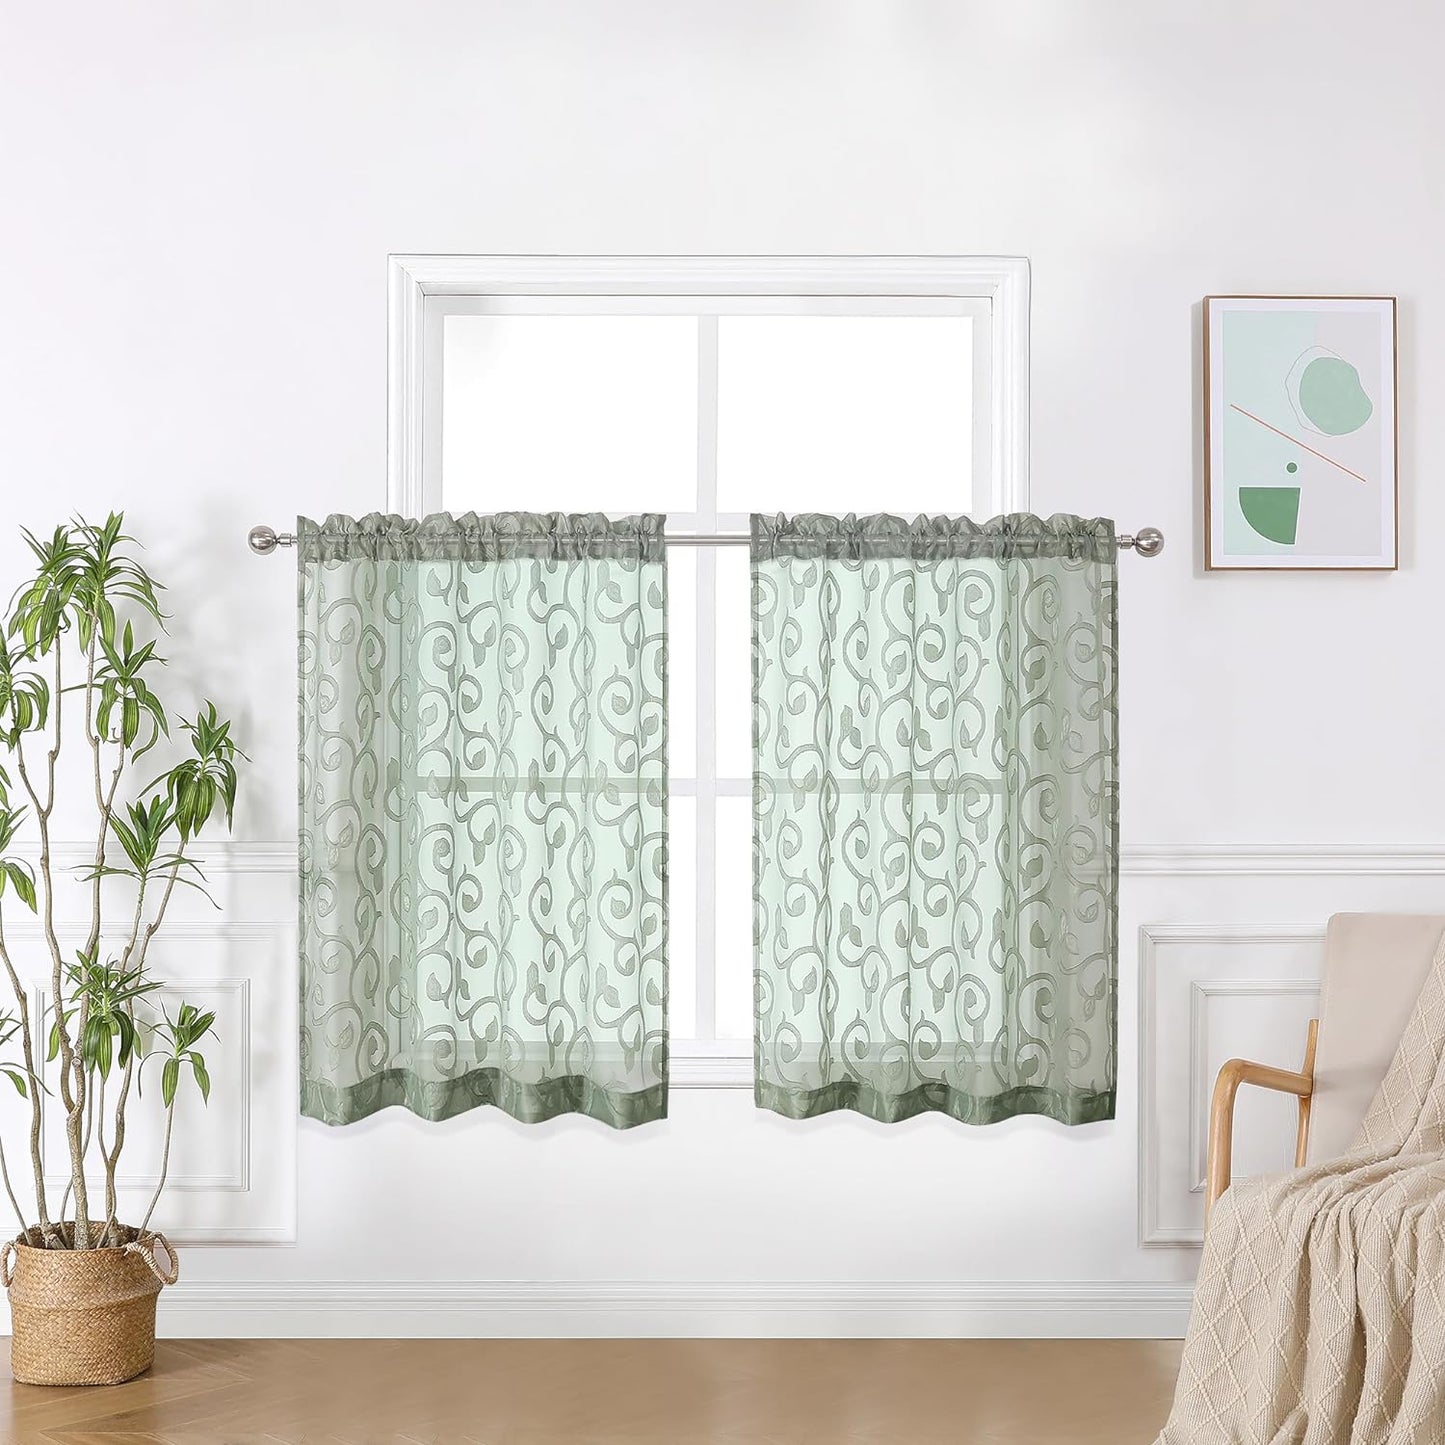 OWENIE Furman Sheer White Curtains 84 Inches Long for Bedroom Living Room 2 Panels Set, White Curtains Jacquard Clip Light Filtering Semi Sheer Curtain Transparent Rod Pocket Window Drapes, 2 Pcs  OWENIE Sage Green 26W X 36L 